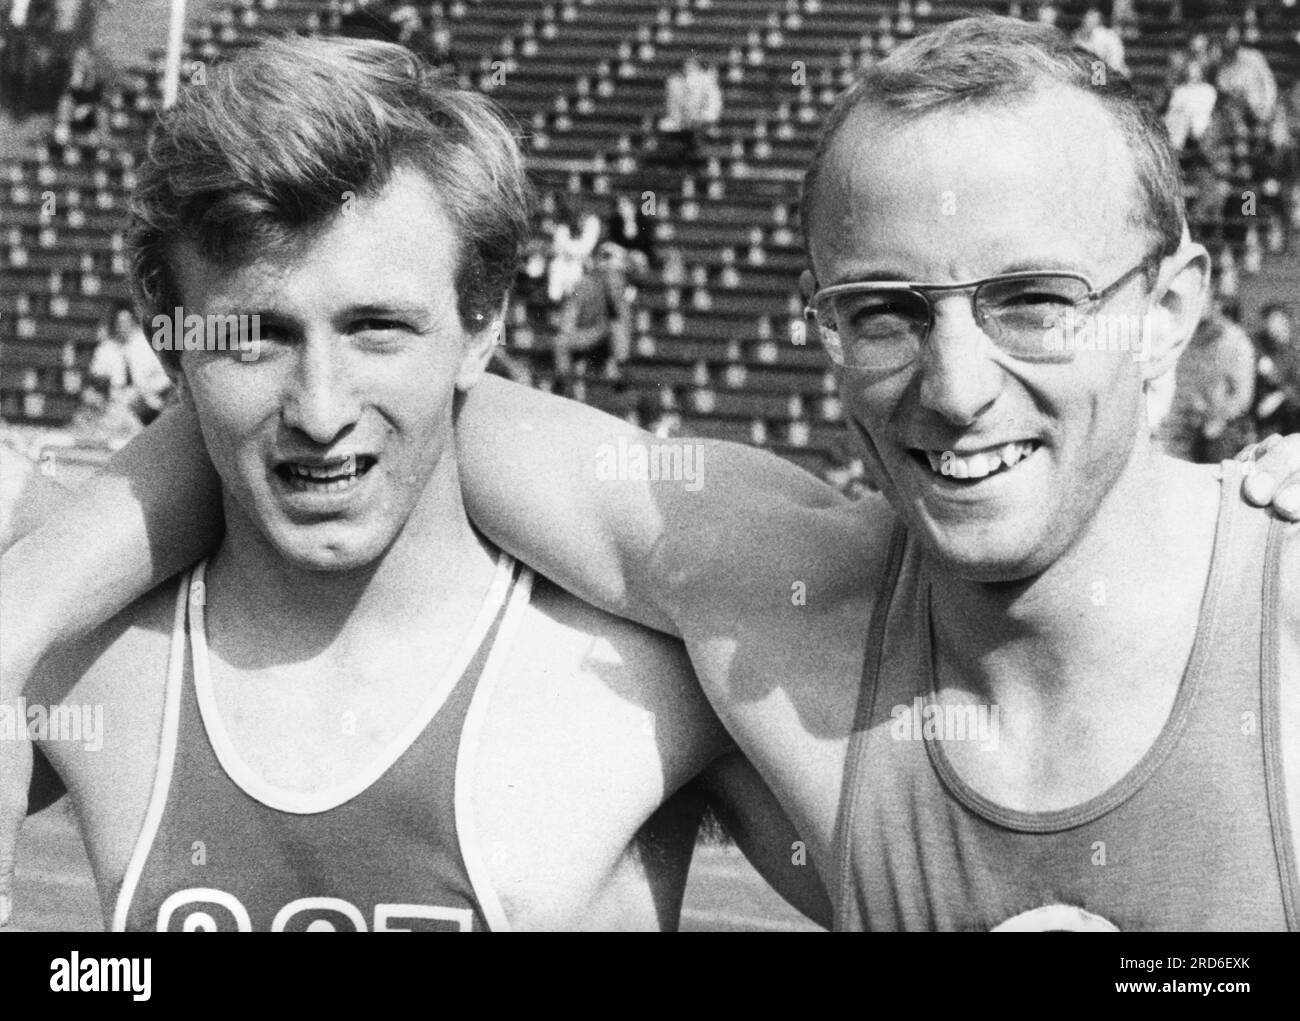 Wucherer, Gerhard, * 11.2.1948, German athlete (left), with Gert Metz, Summer Olympic Games, ADDITIONAL-RIGHTS-CLEARANCE-INFO-NOT-AVAILABLE Stock Photo